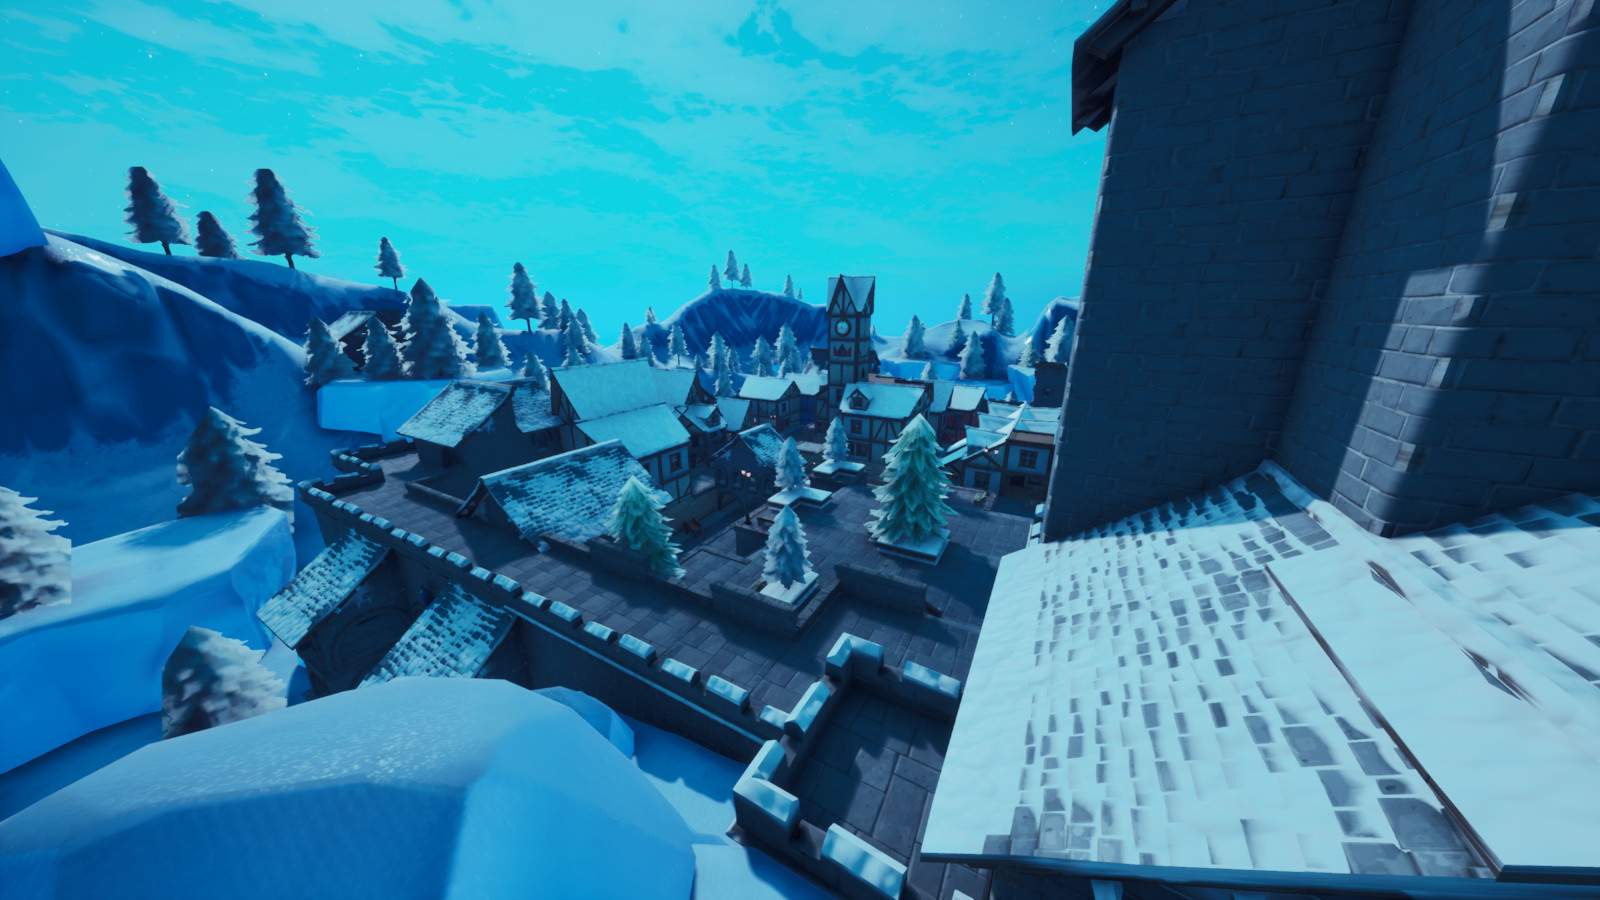 FROSTY CHRISTMAS TOWN- HIDE AND SEEK